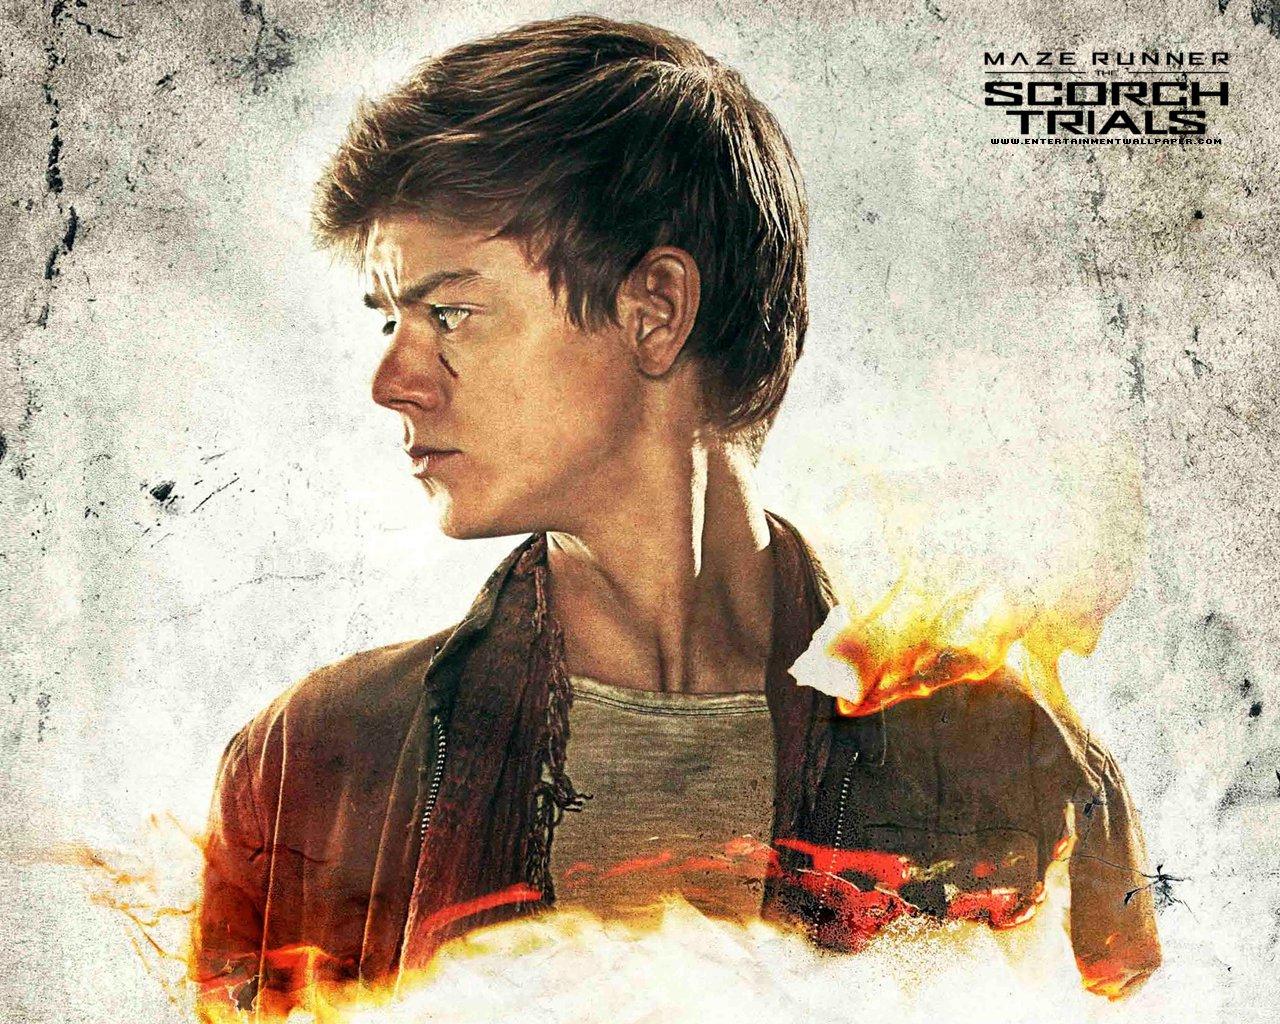 The Maze Runner imagens The Scorch Trials HD wallpapers and.